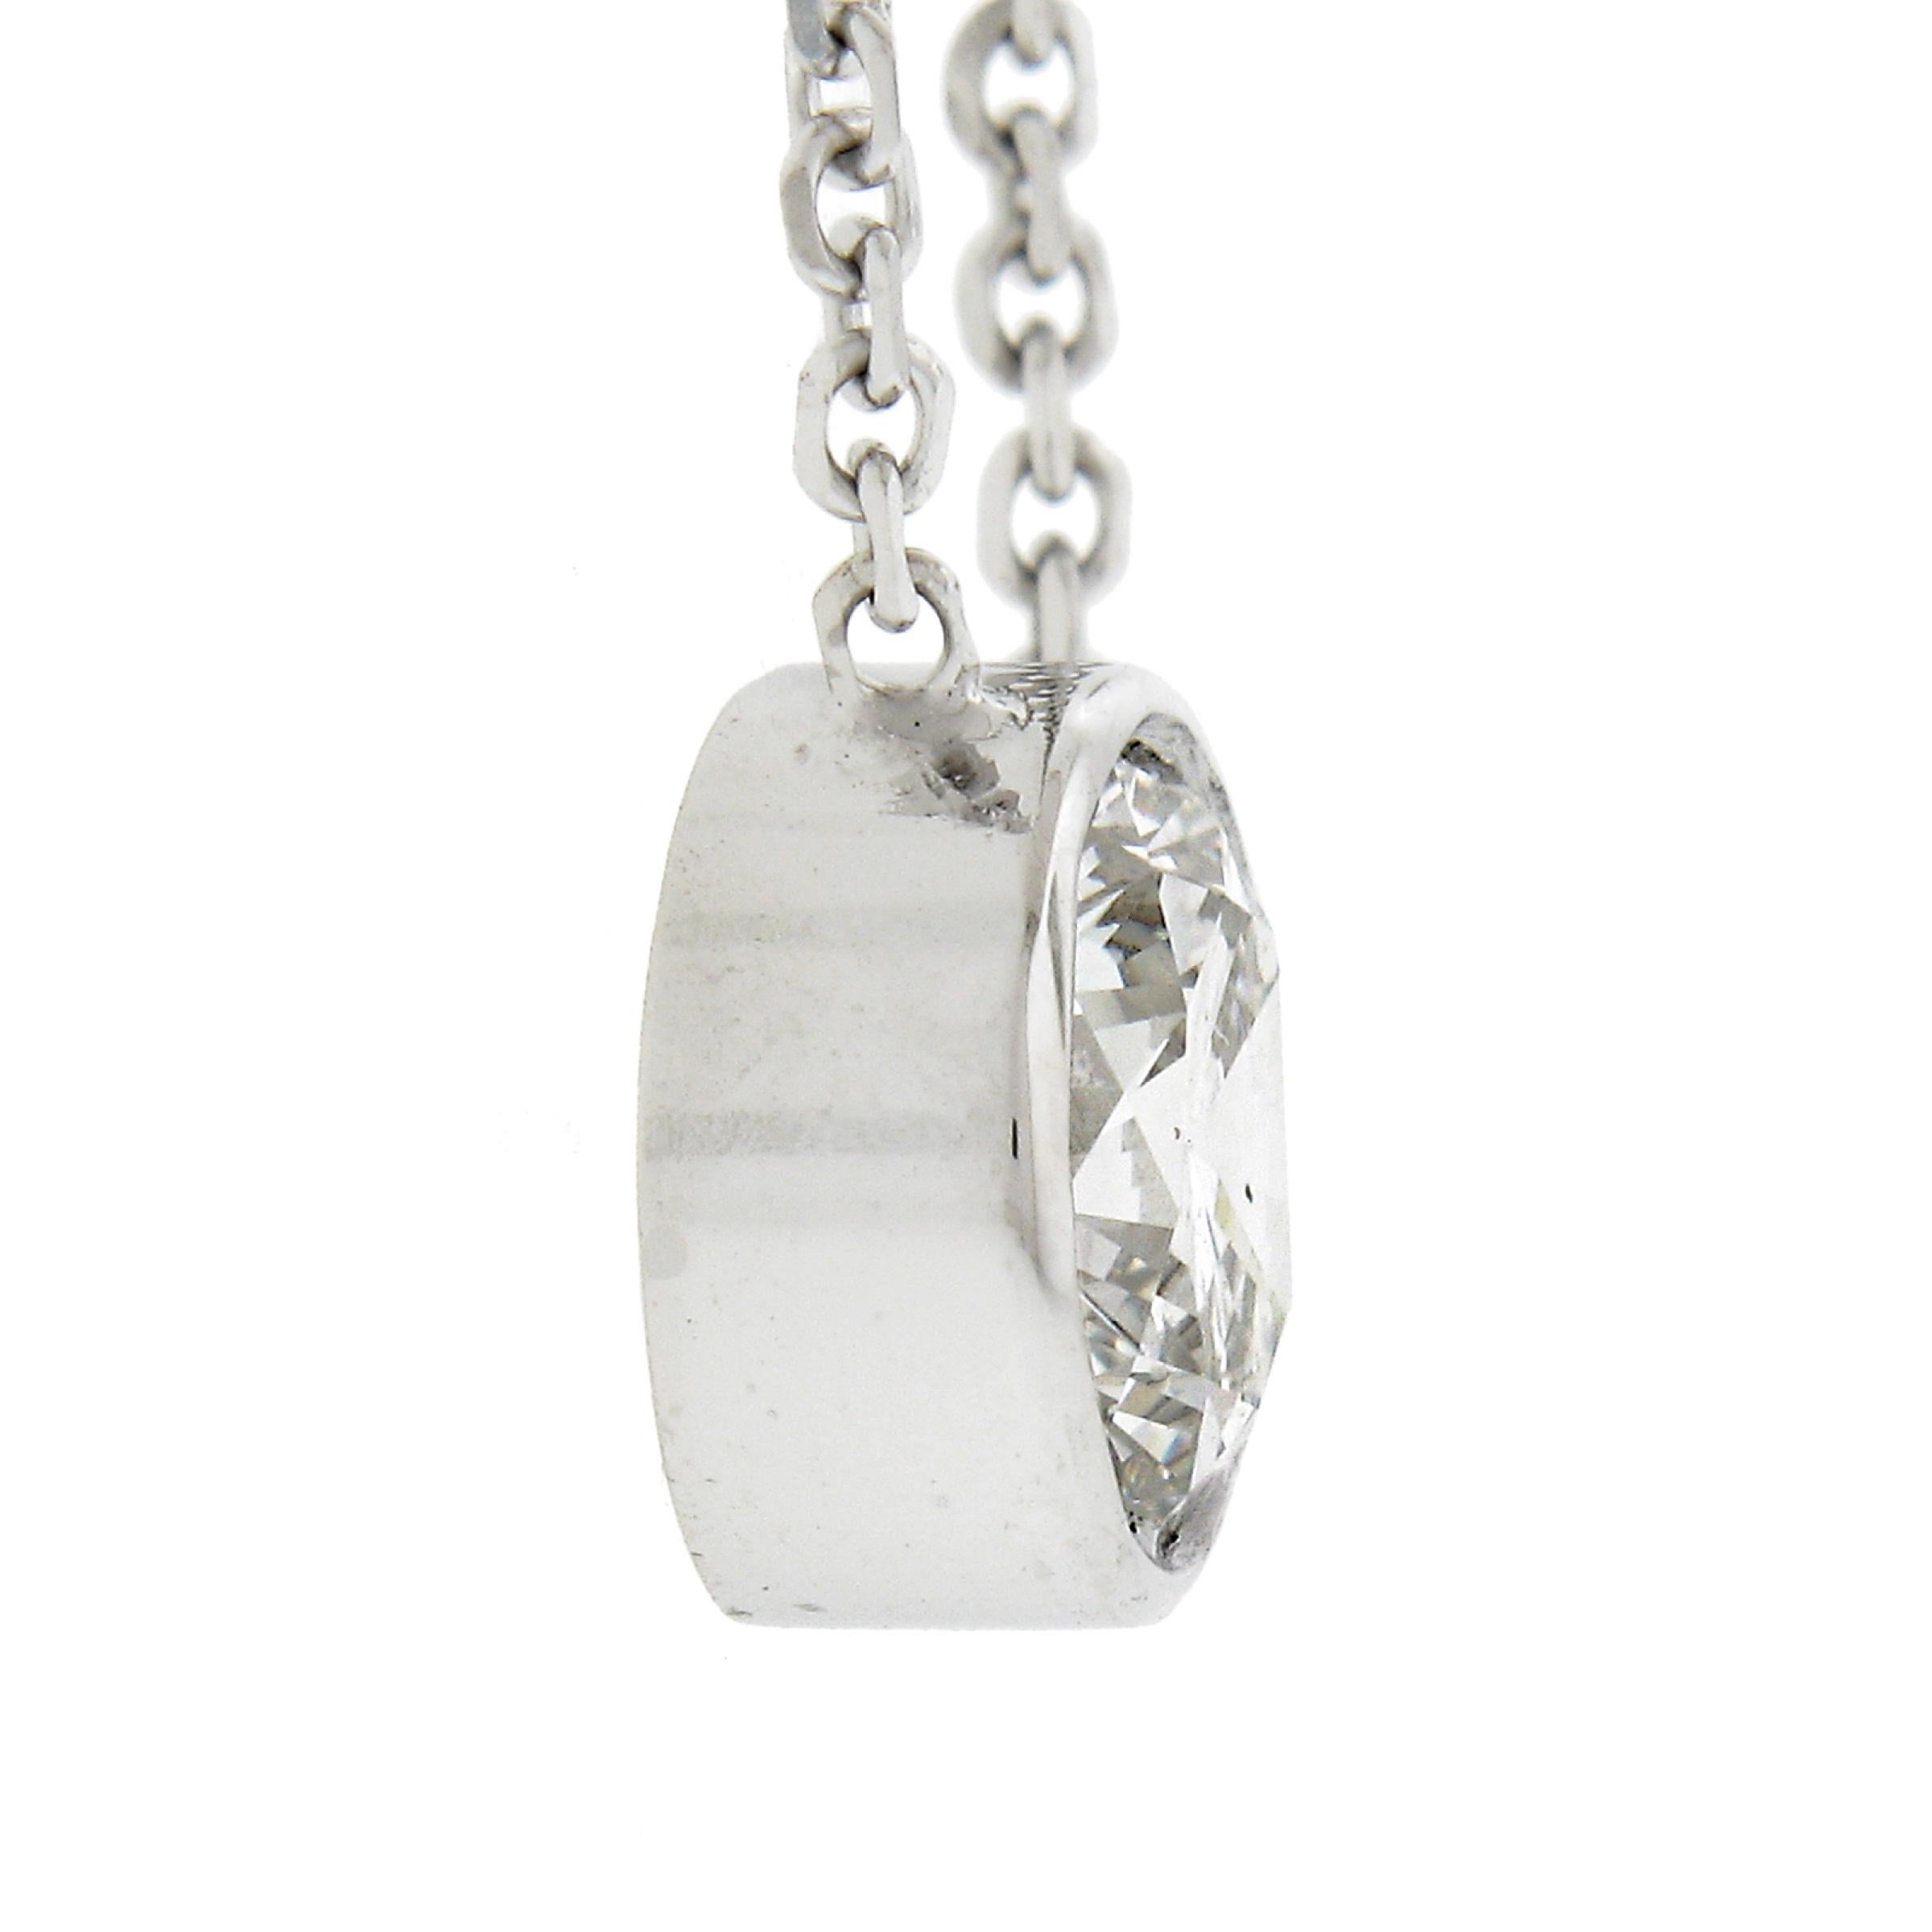 NEW 14k White Gold .84ctw GIA Round Diamond Solitaire Pendant & Adjustable Chain For Sale 1